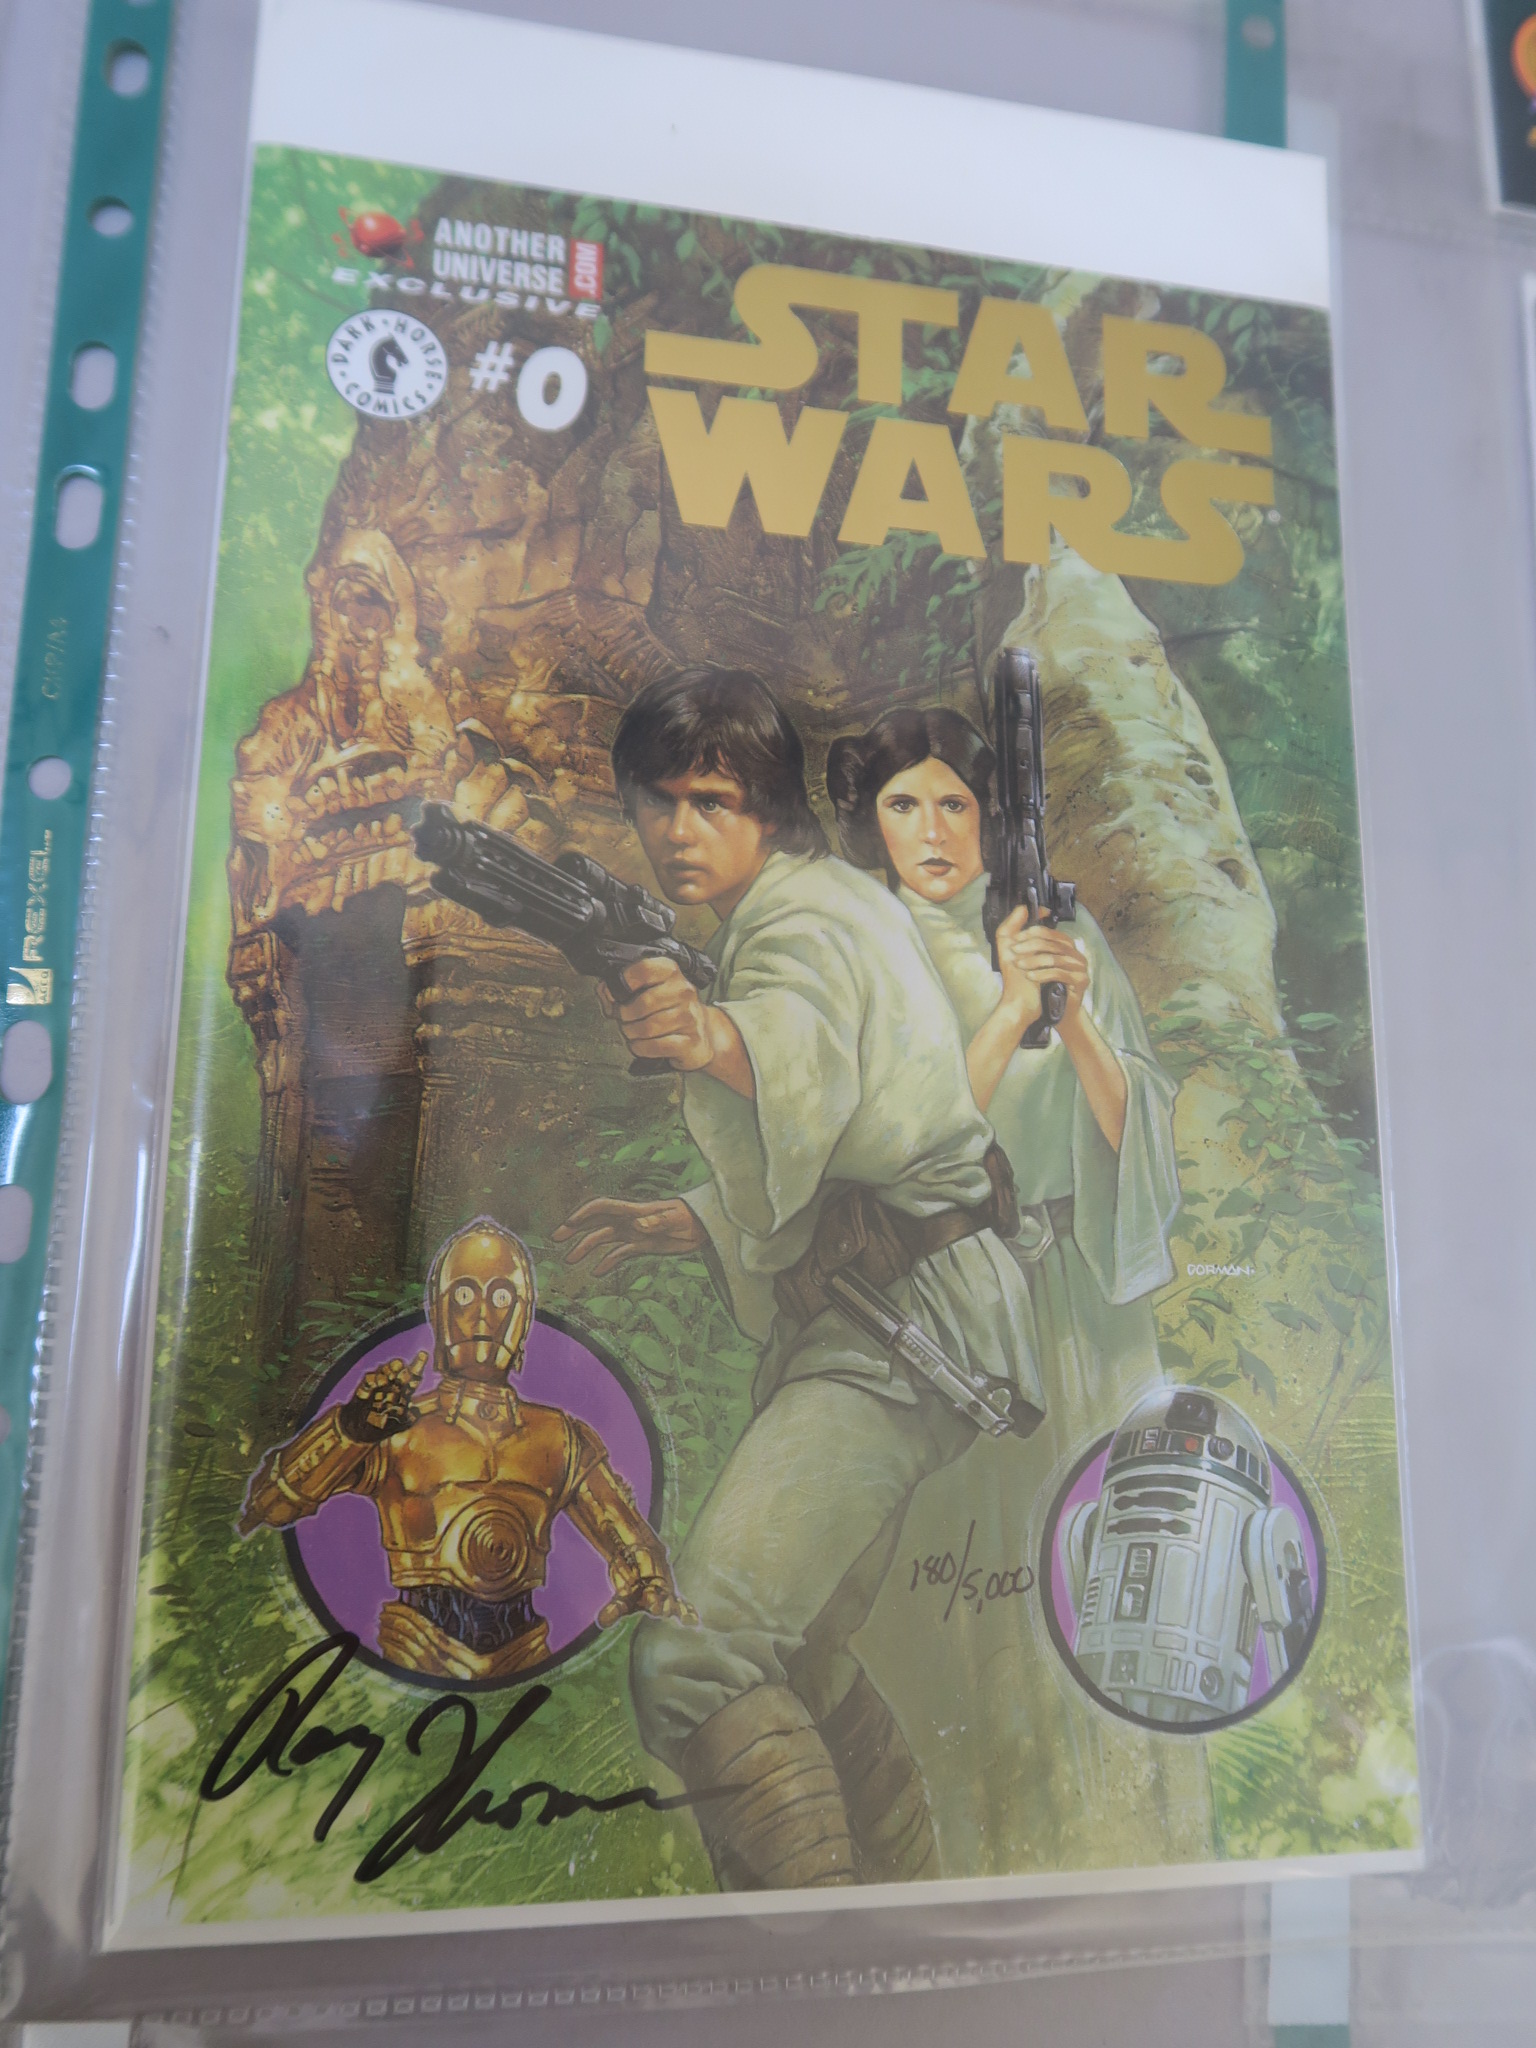 Star Wars signed comics including Star Wars Queen Amidala #1 (signed by P. Craig Russell), Star Wars - Image 3 of 3